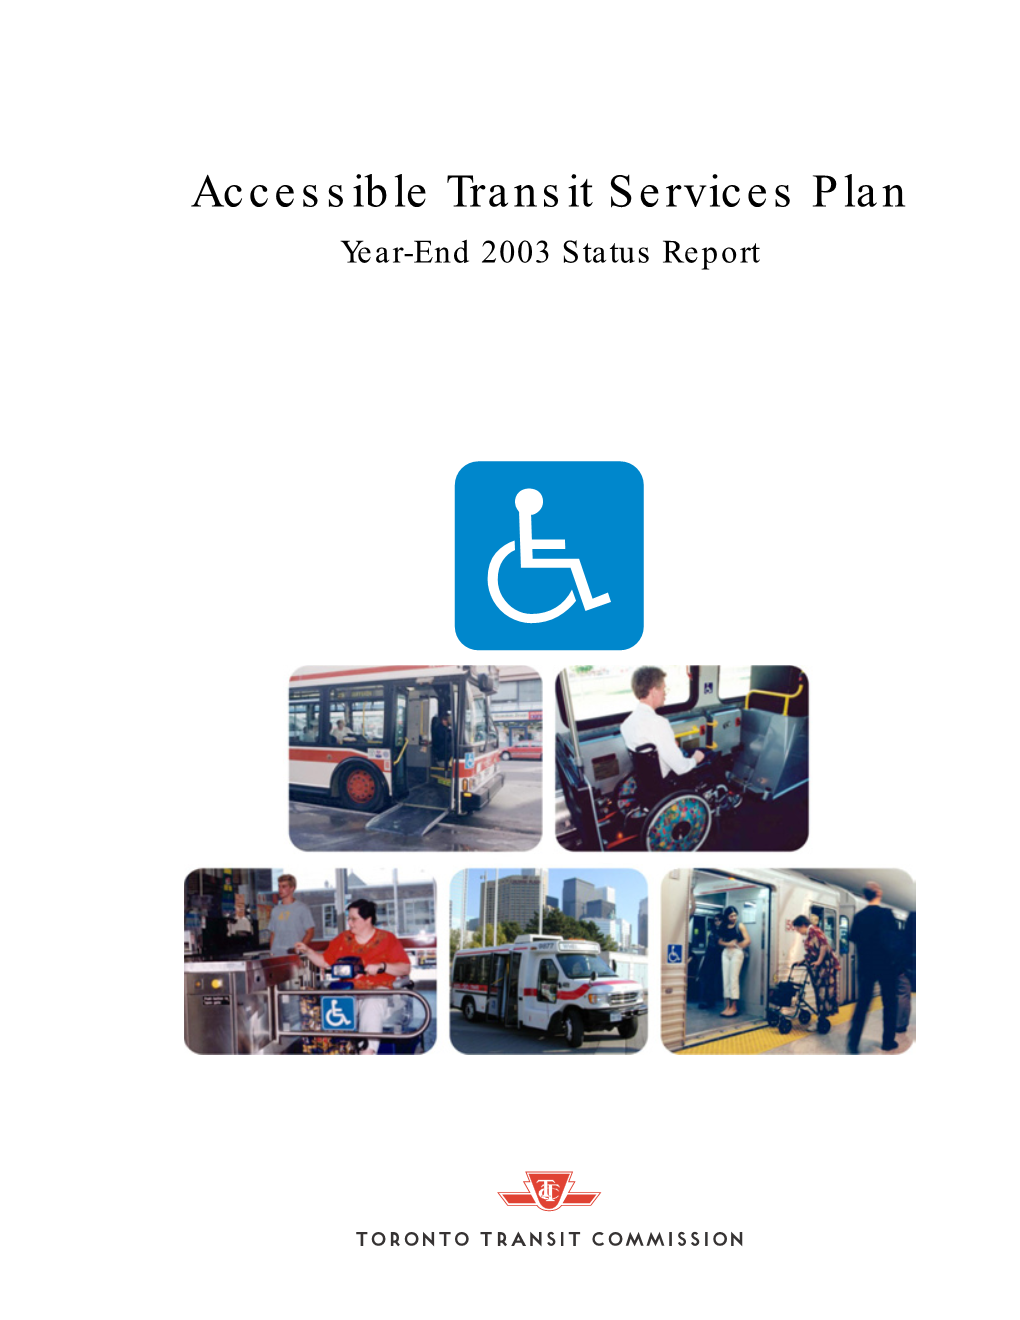 Accessible Transit Services Plan Year-End 2003 Status Report TTC Accessible Transit Services Plan Year-End 2003 Status Report TABLE of CONTENTS